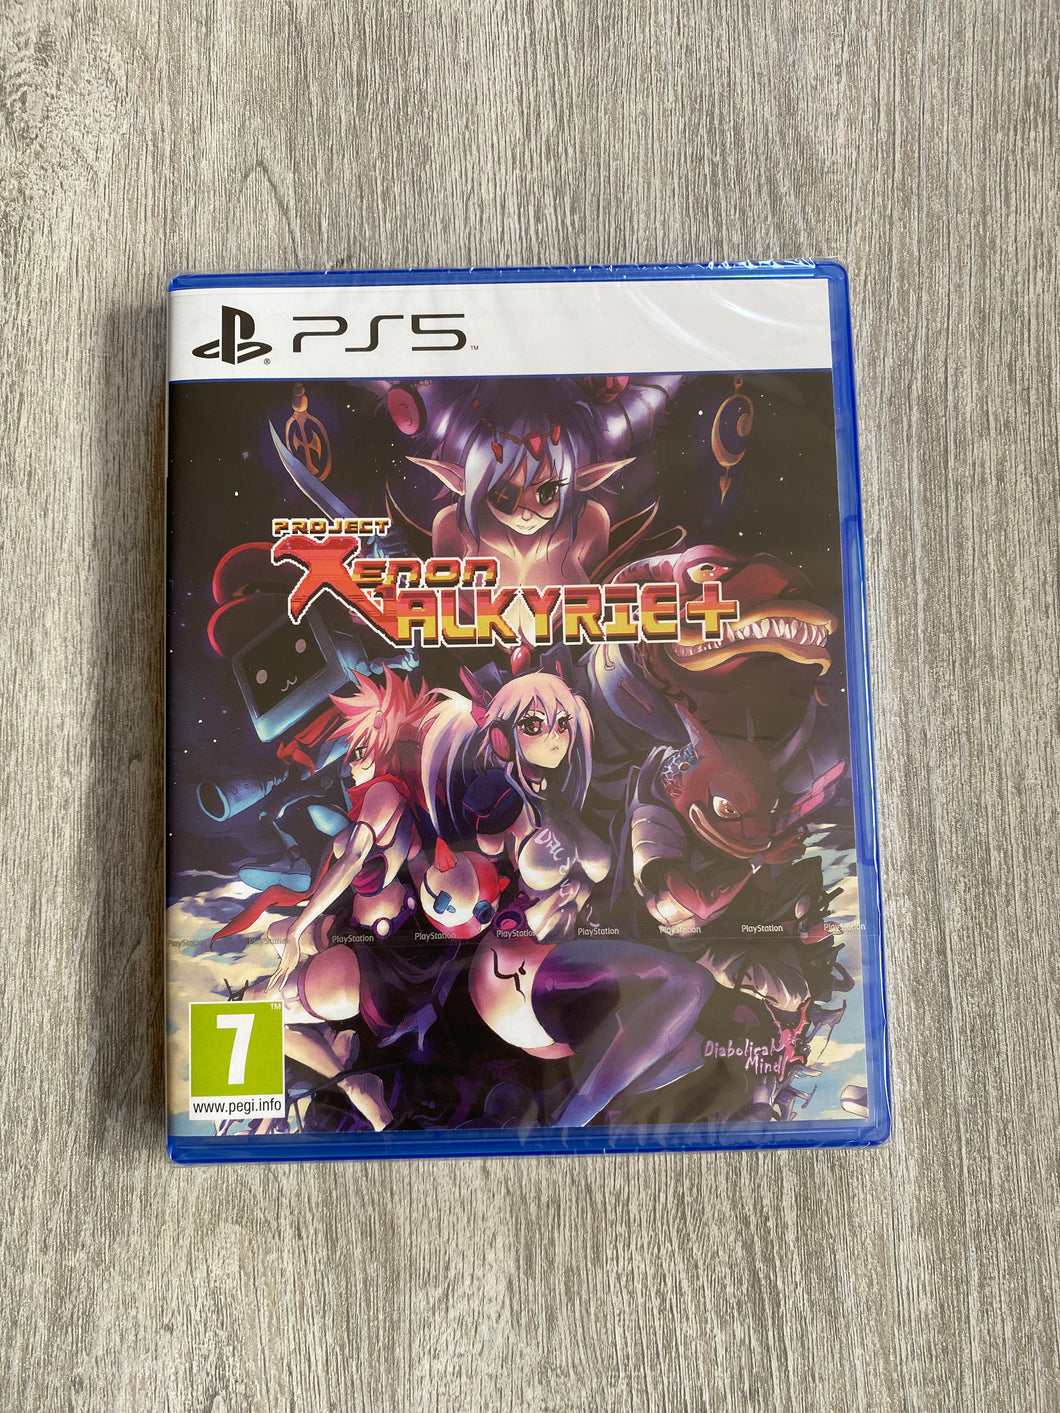 Xenon valkyrie+ / Red art games / PS5 / 999 copies